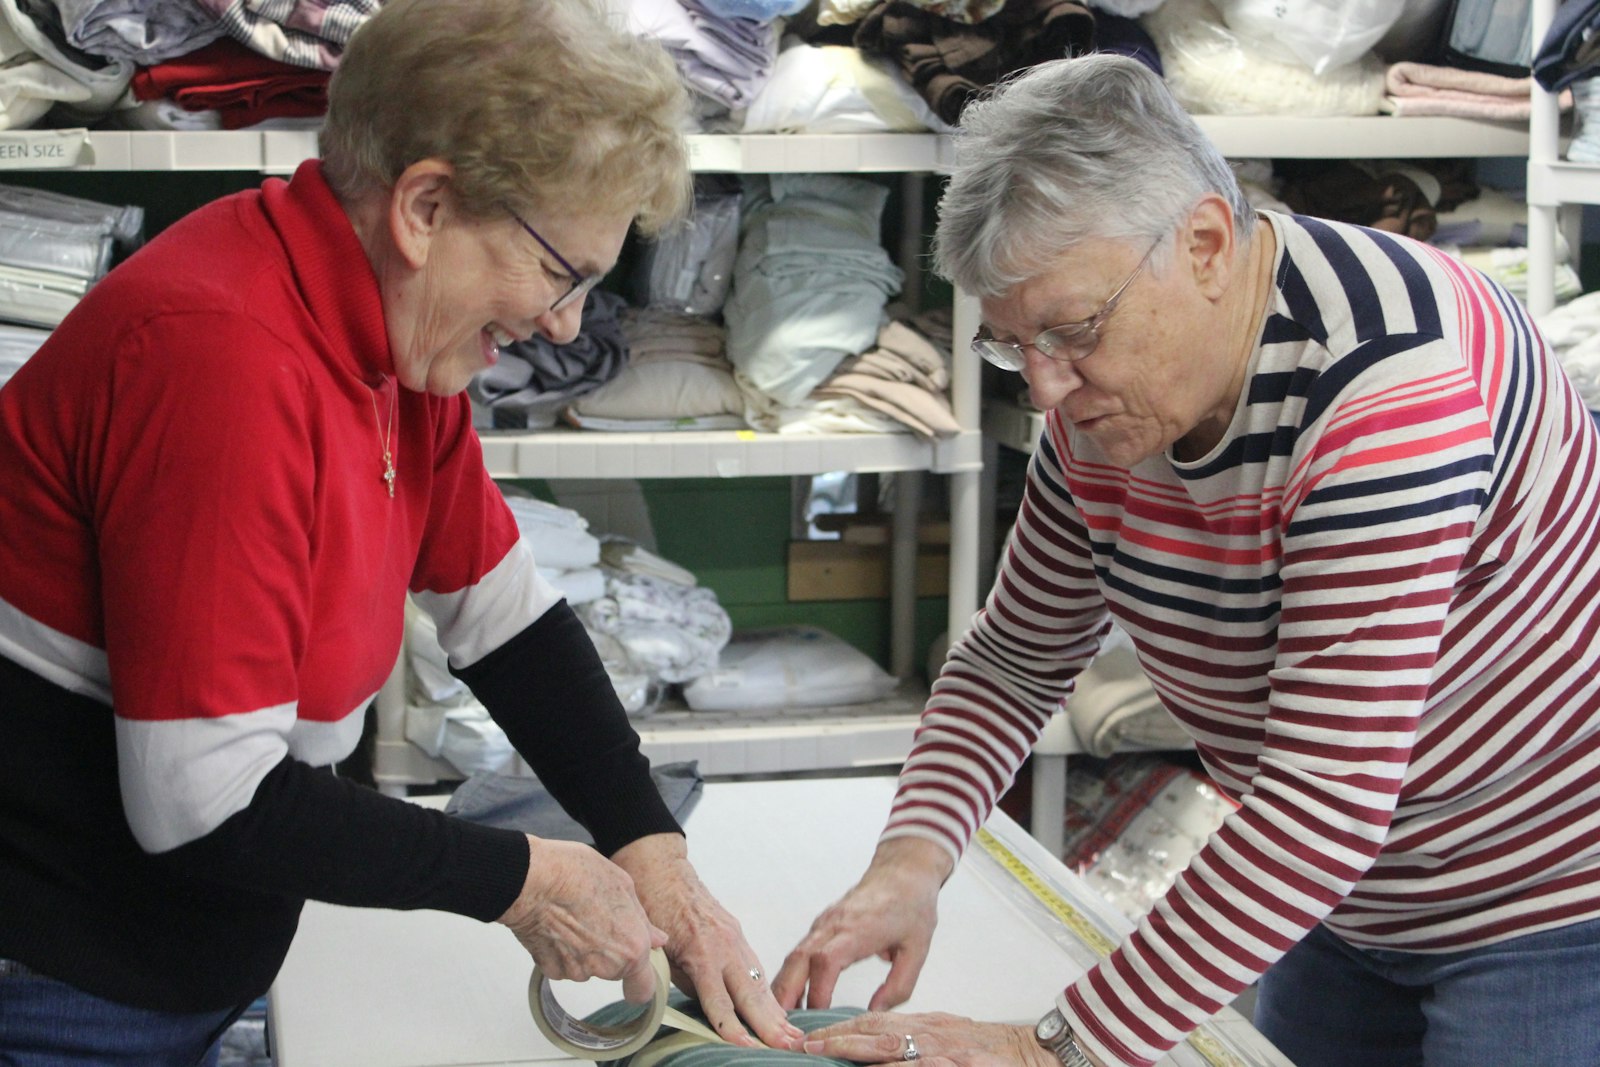 In addition to the "Movers and Shaker," who help the nonprofit deliver furniture, the Catholic Community Response Team also includes the "Miracle Makers," a group of dedicated, retired women who help collect, organize and sell donated household items at rummage sales to raise money to help the nonprofit's cause.